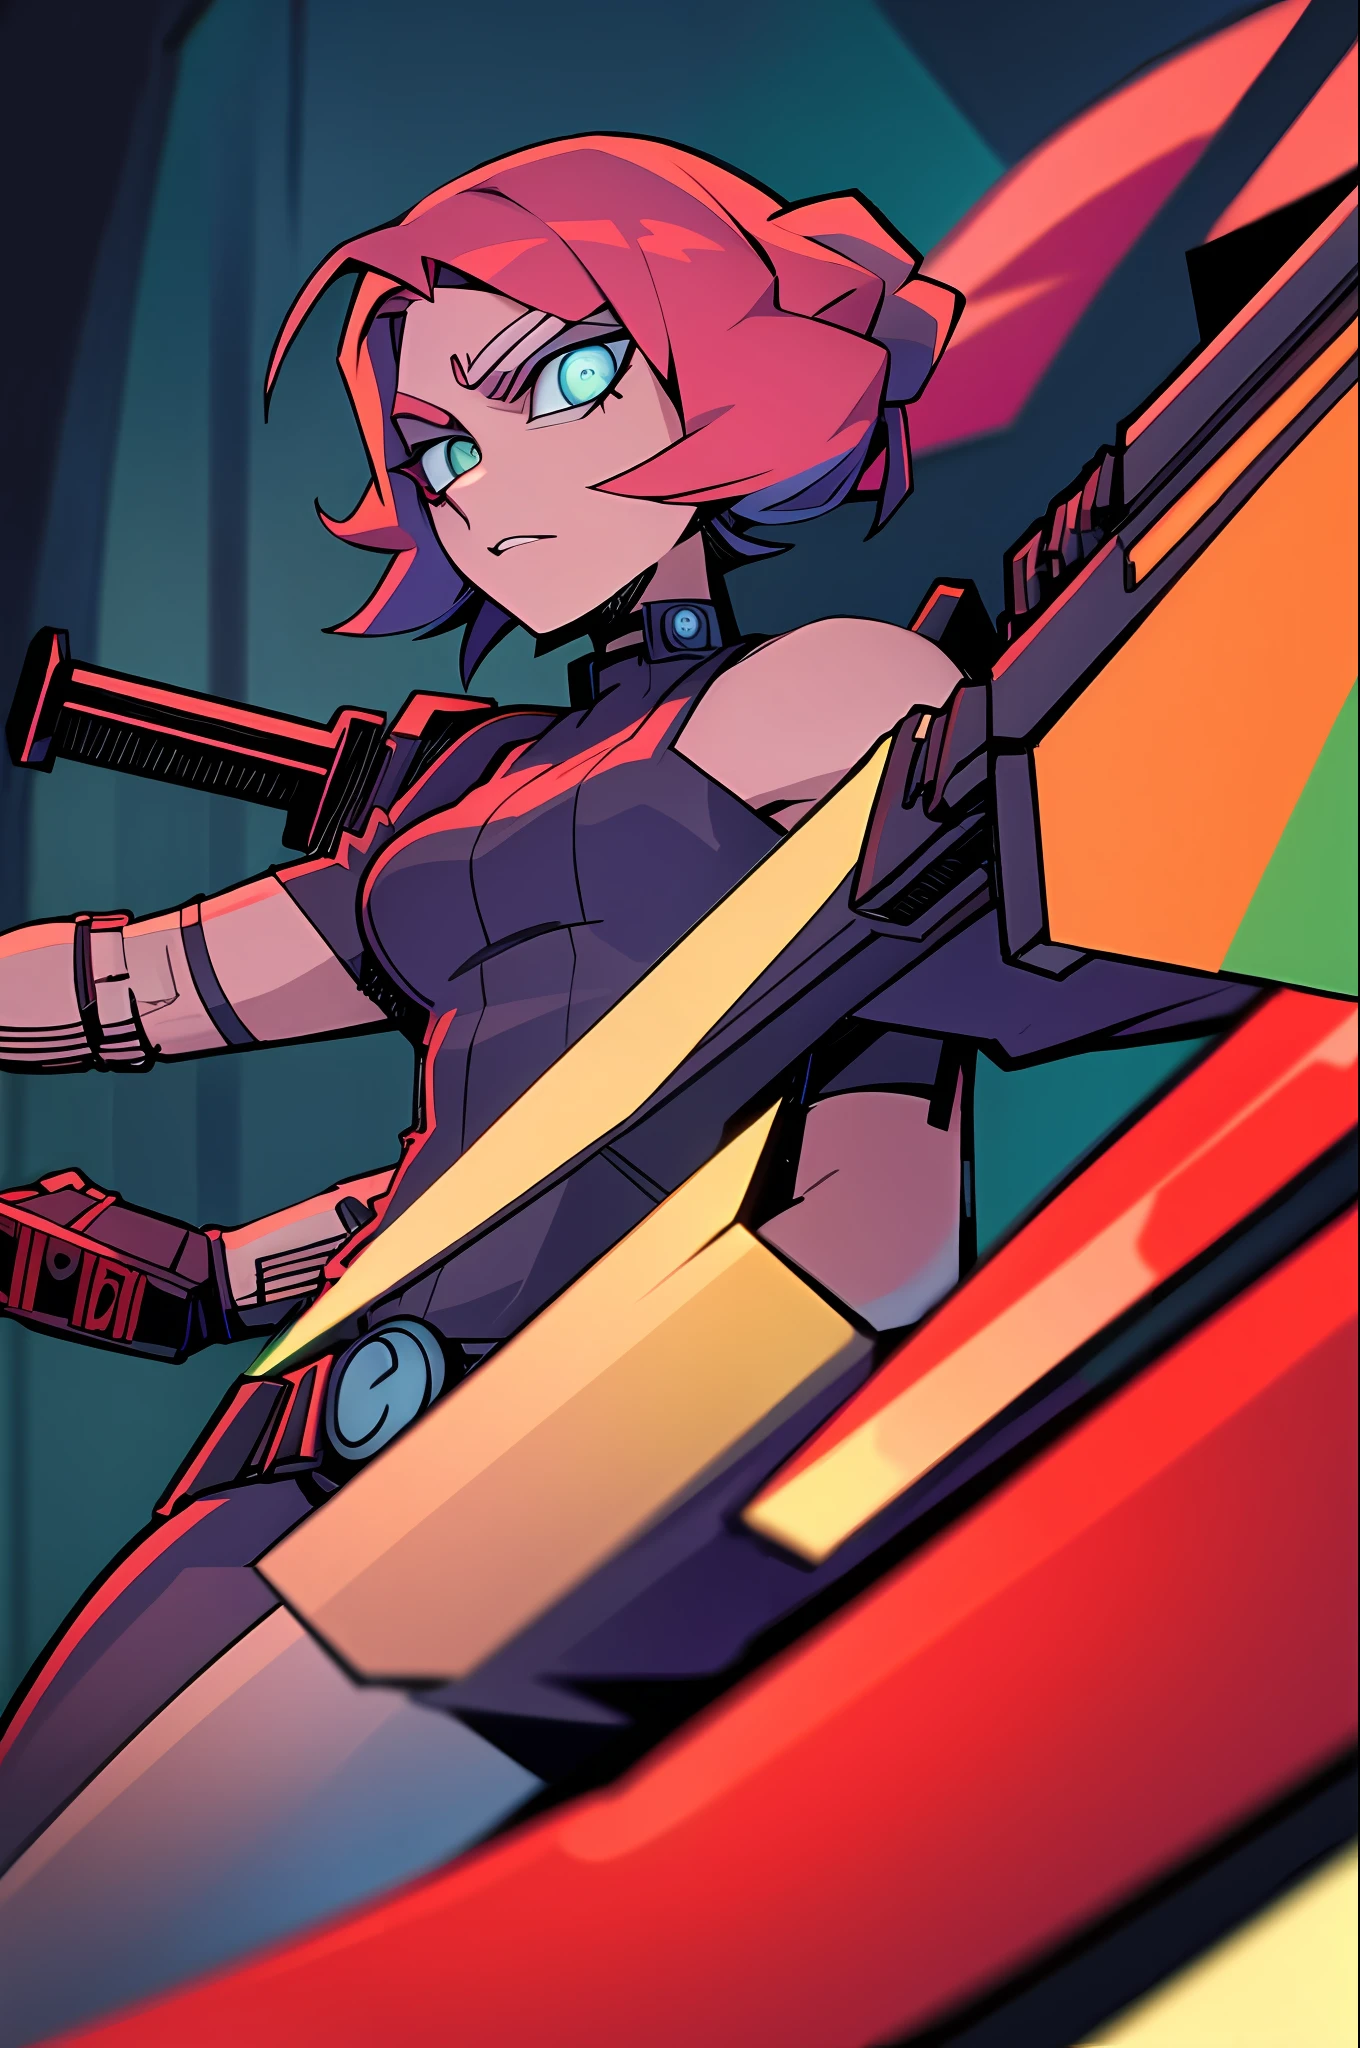 Photorealistic masterpiece in high resolution, best quality, with flat colors and amazing splash paints. Composition of the face, with 1 girl with short colored hair and cyberlimbs, wielding a katana. All this in a cyberpunk setting